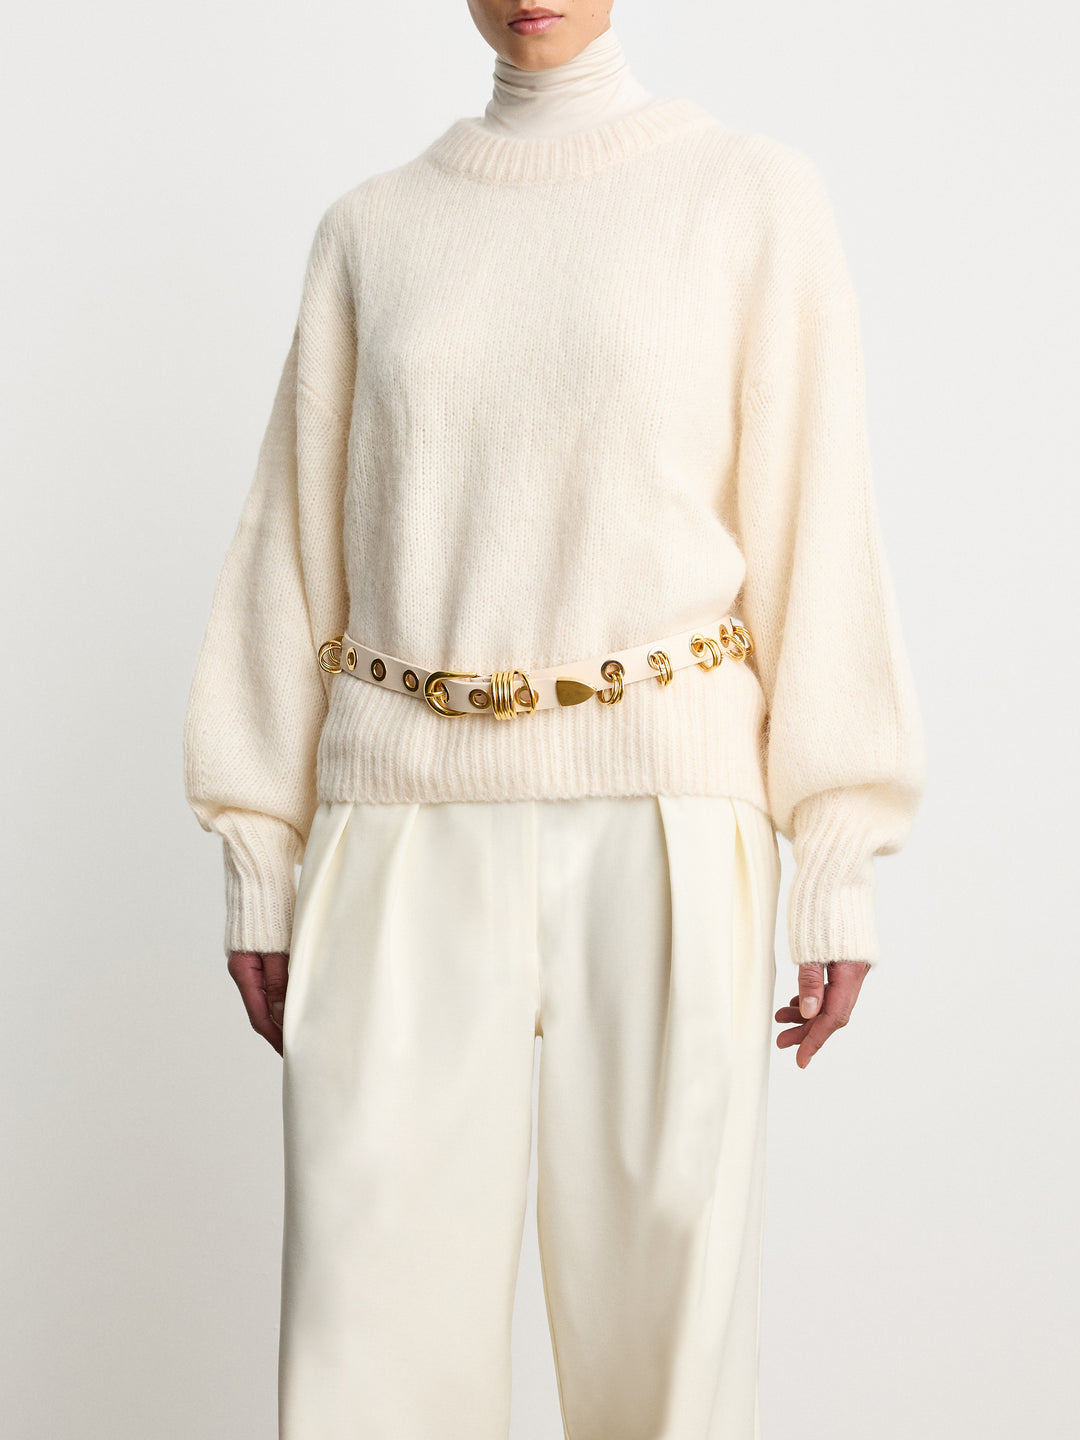 Model wearing Déhanche Revenge Gold white leather belt with gold grommets and buckle, styled with cream trousers and a cream sweater.